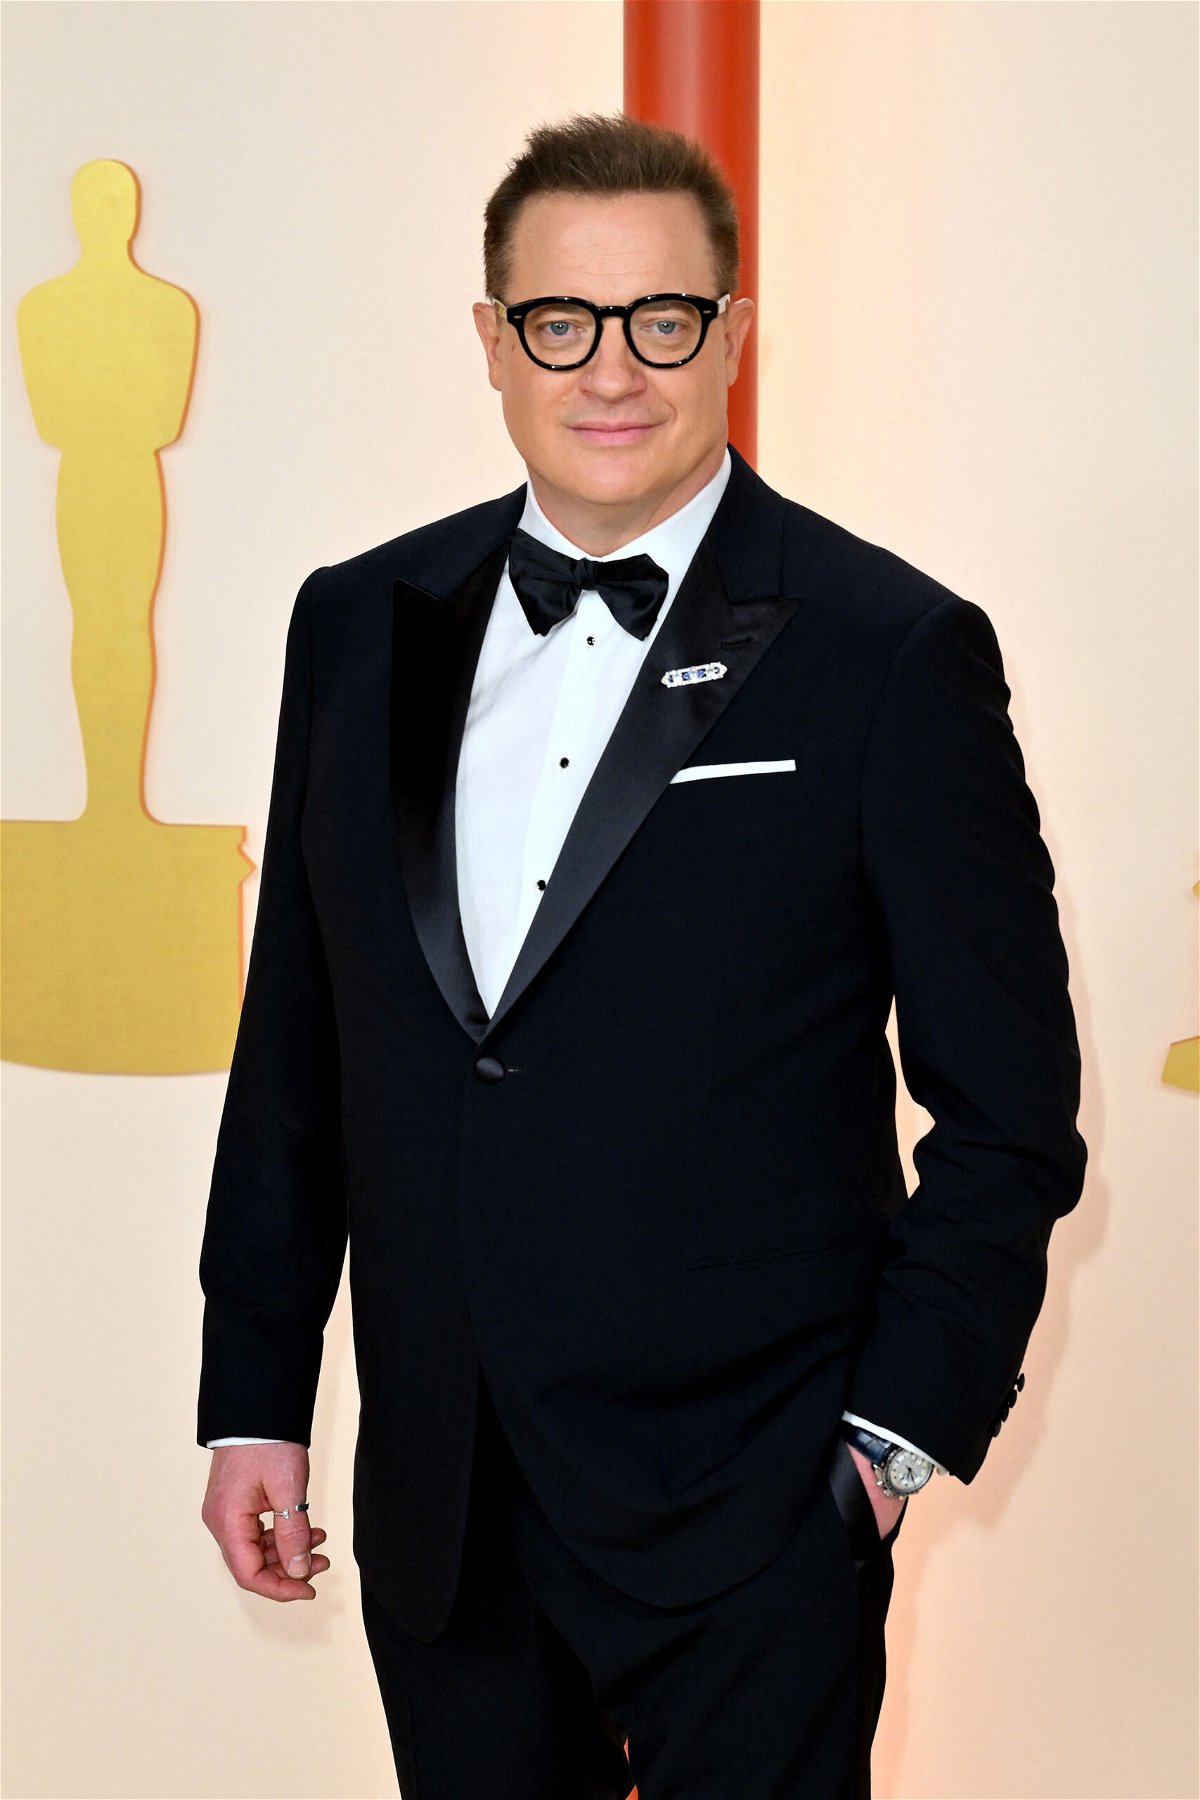 <i>Angela Weiss/AFP/Getty Images</i><br/>Brendan Fraser on the red carpet at the 2023 Oscars.